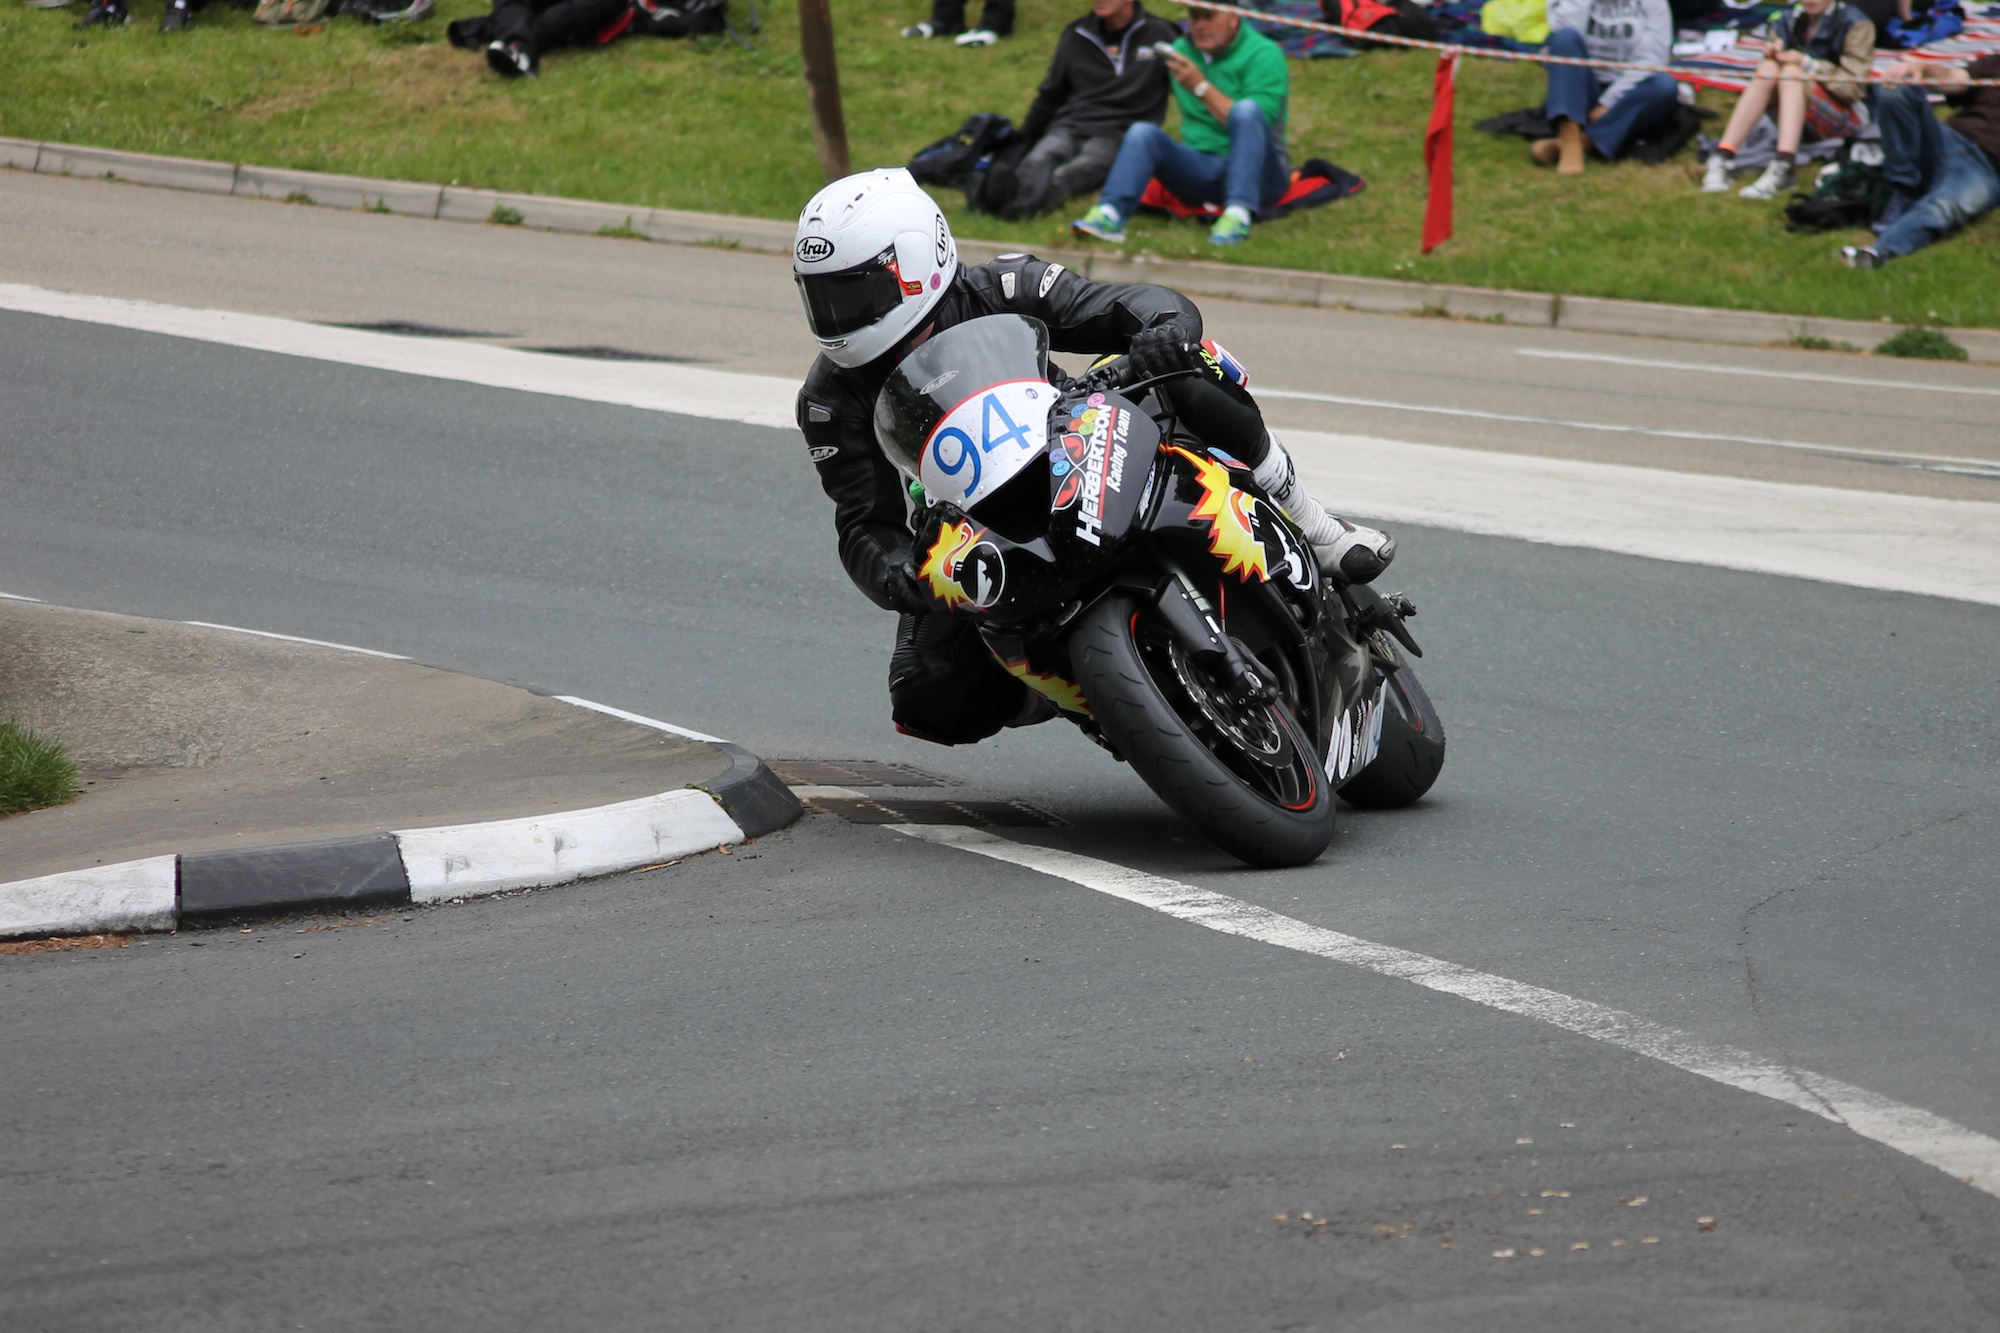 Dominic Herbertson Set To Compete For Second Time At The Isle of Man TT ...